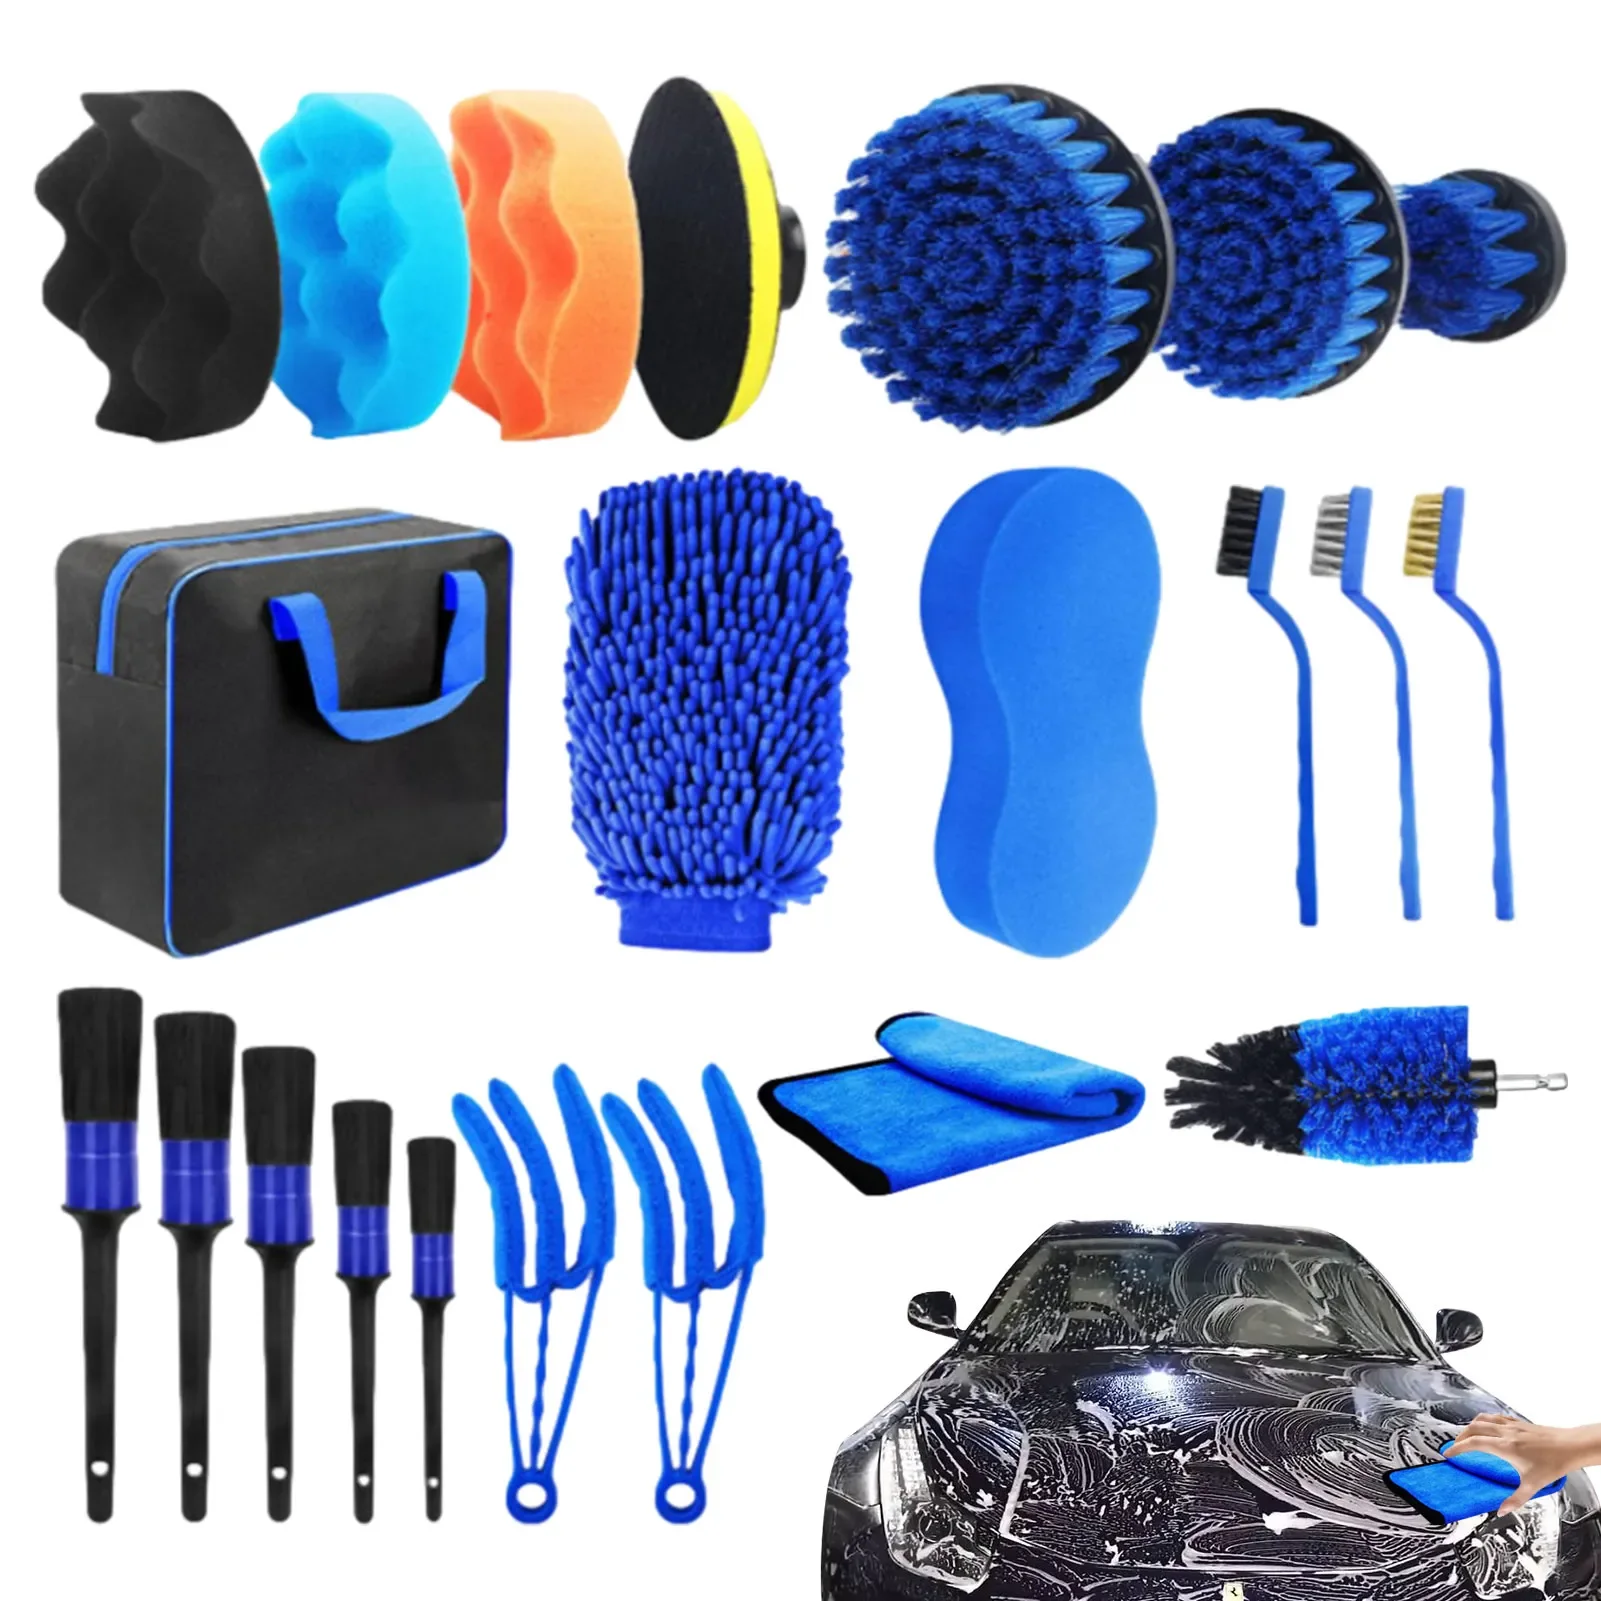 

Cleaning Kit 22pcs Car Detailing Kit Wheel Tire Cleaning Tools Car Wash Kit Auto Cleaning Supplies For Cleaning Wheels